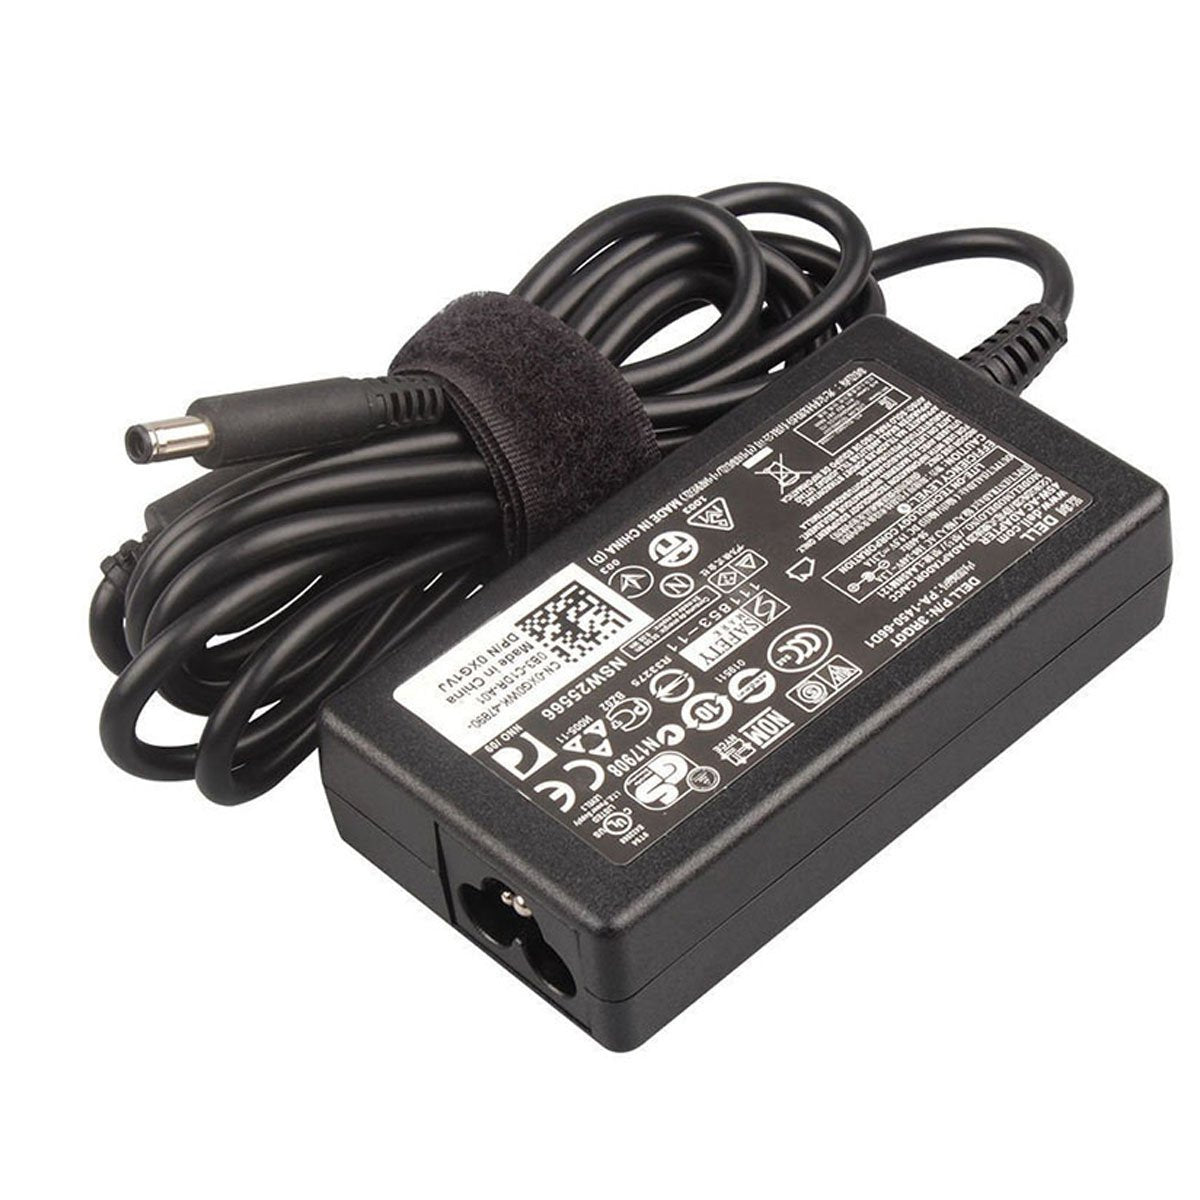 Dell Inspiron 17 5767 Original 45W Laptop Charger Adapter With Power 19.5V 4.5mm Pin